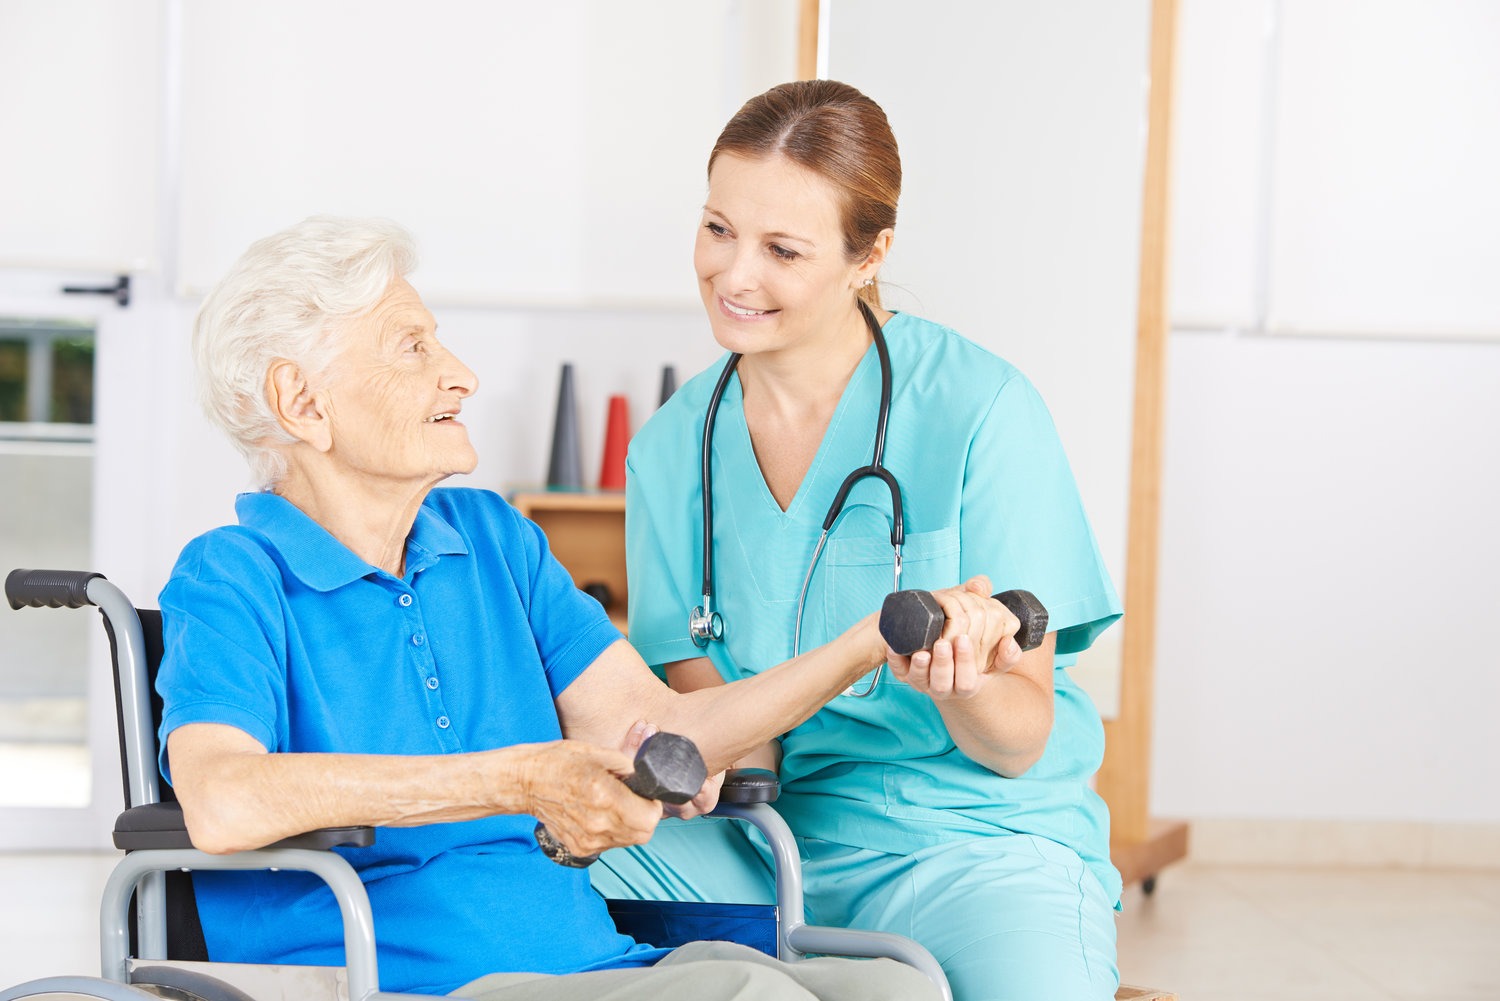 A Skilled Nursing Care Provider working with a resident in rehab from an injury